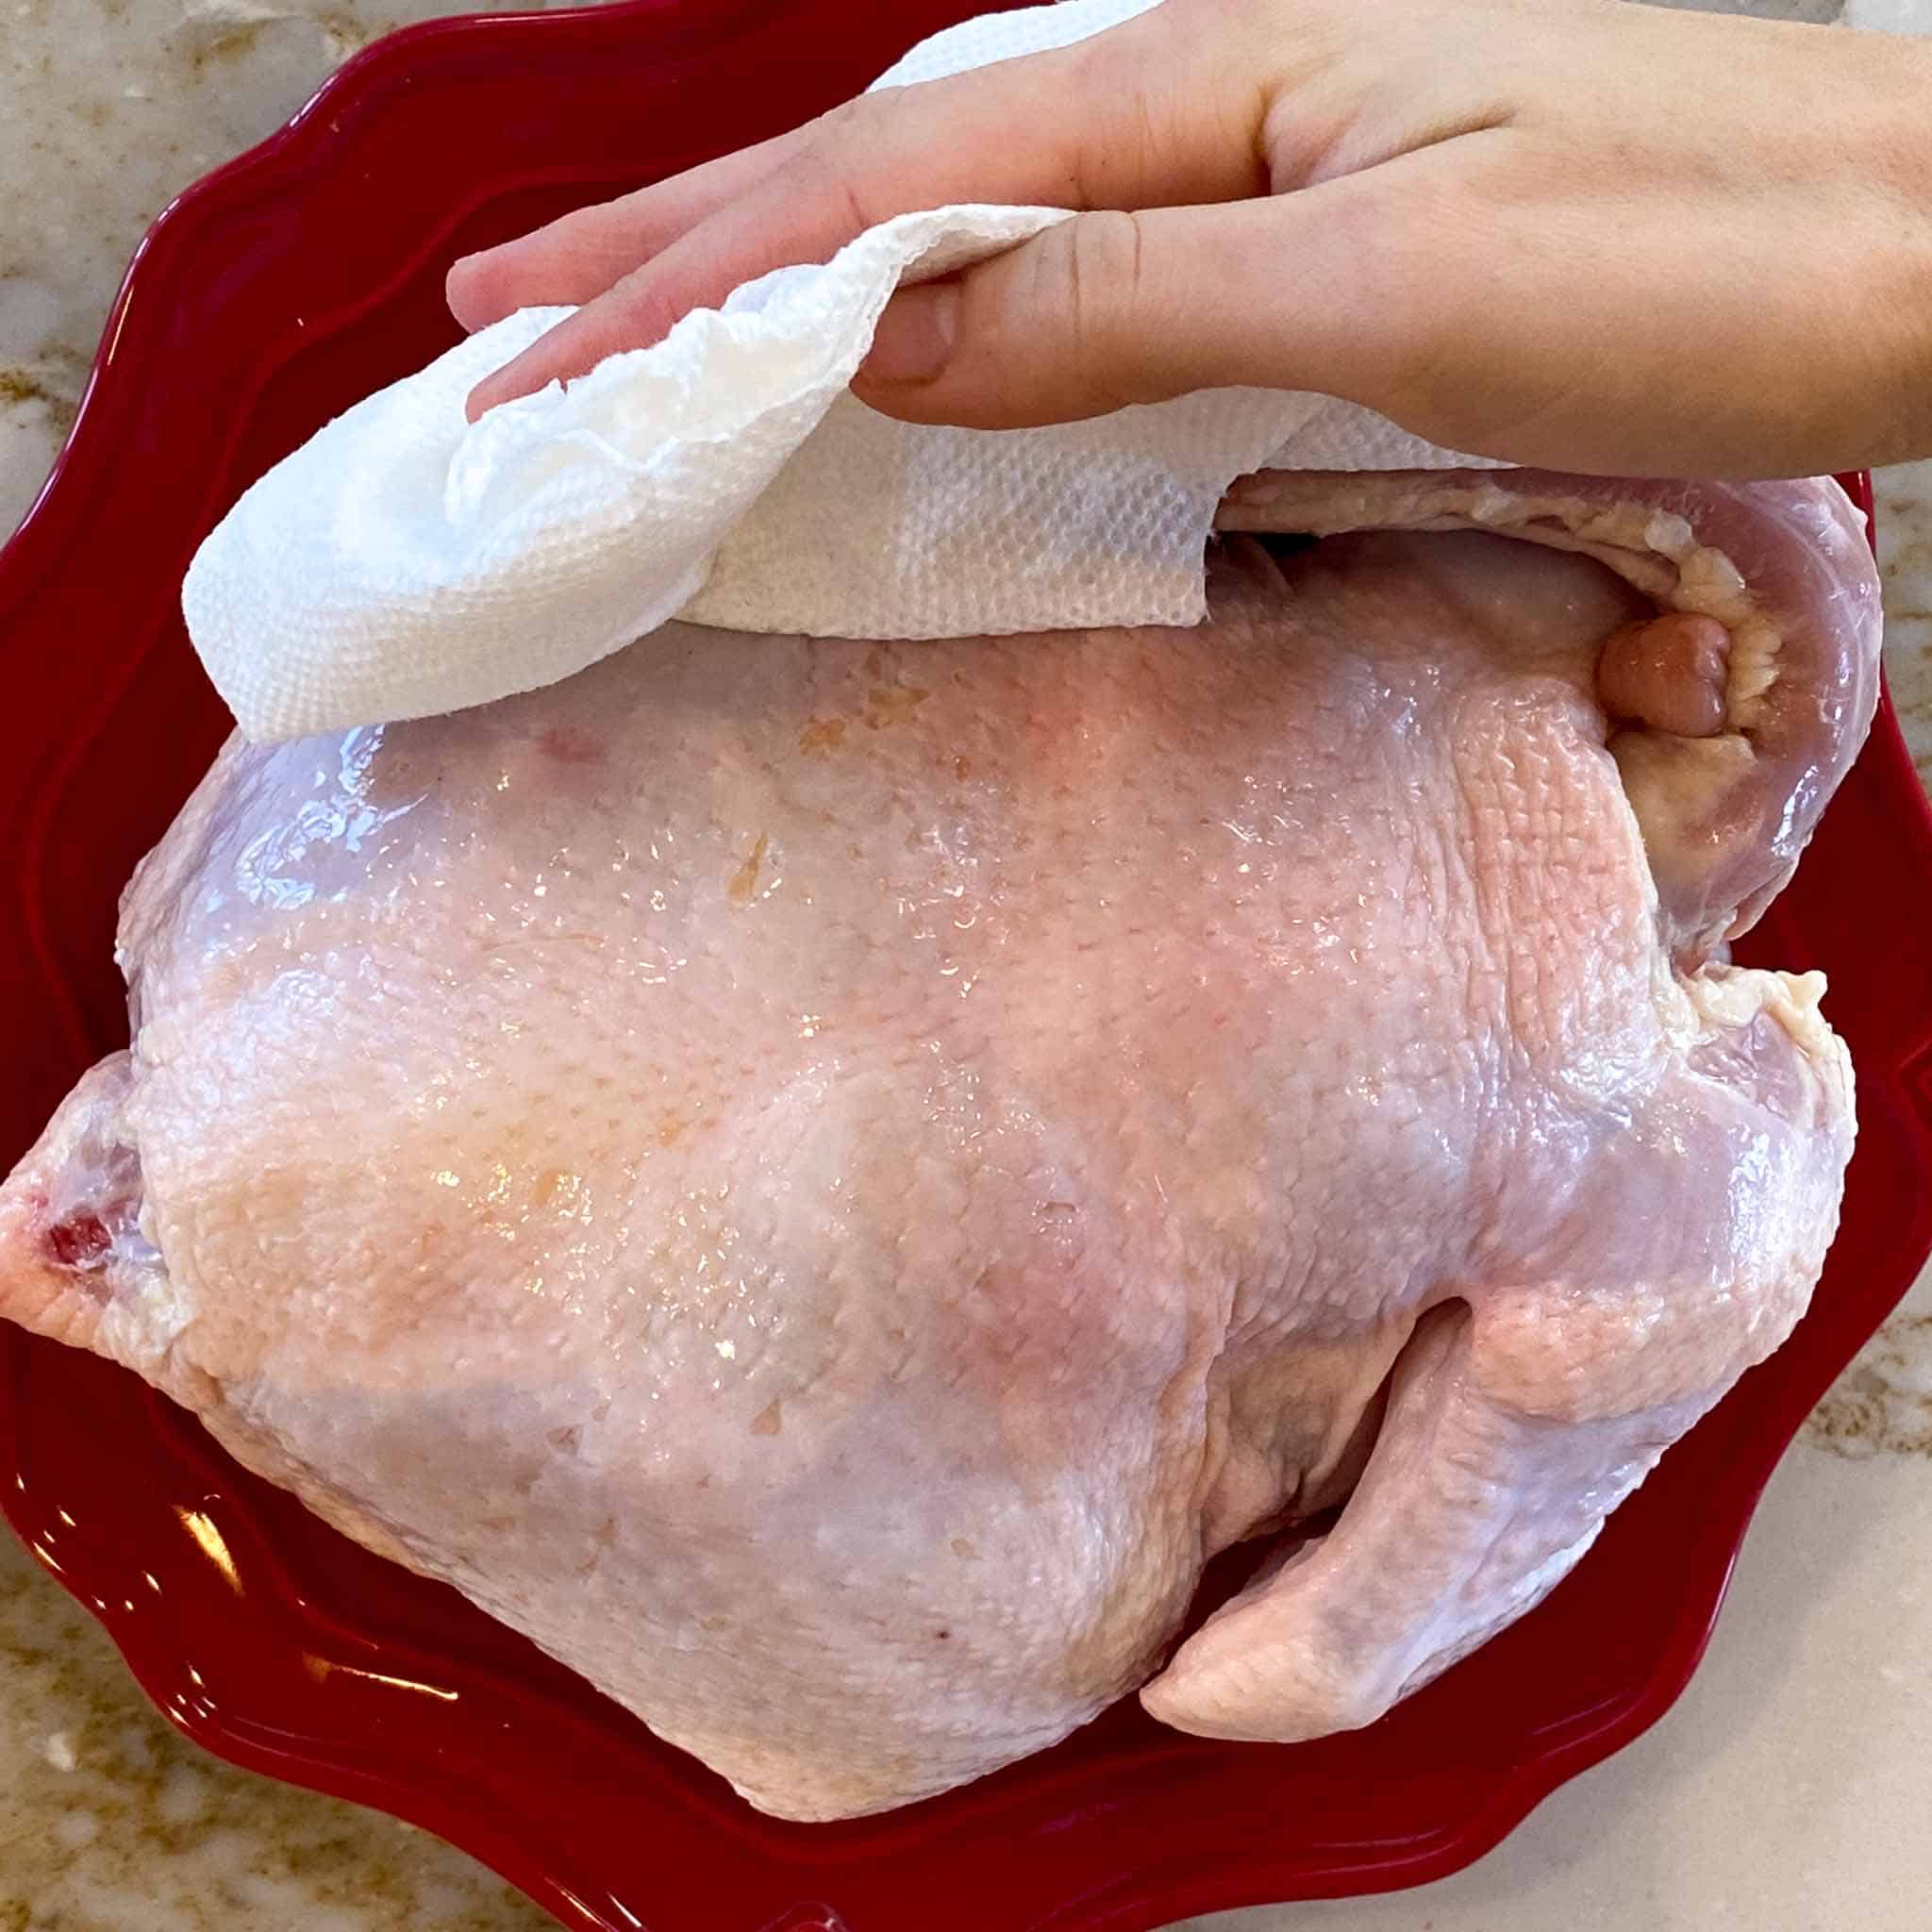 Chicken being patted dry with paper towel.